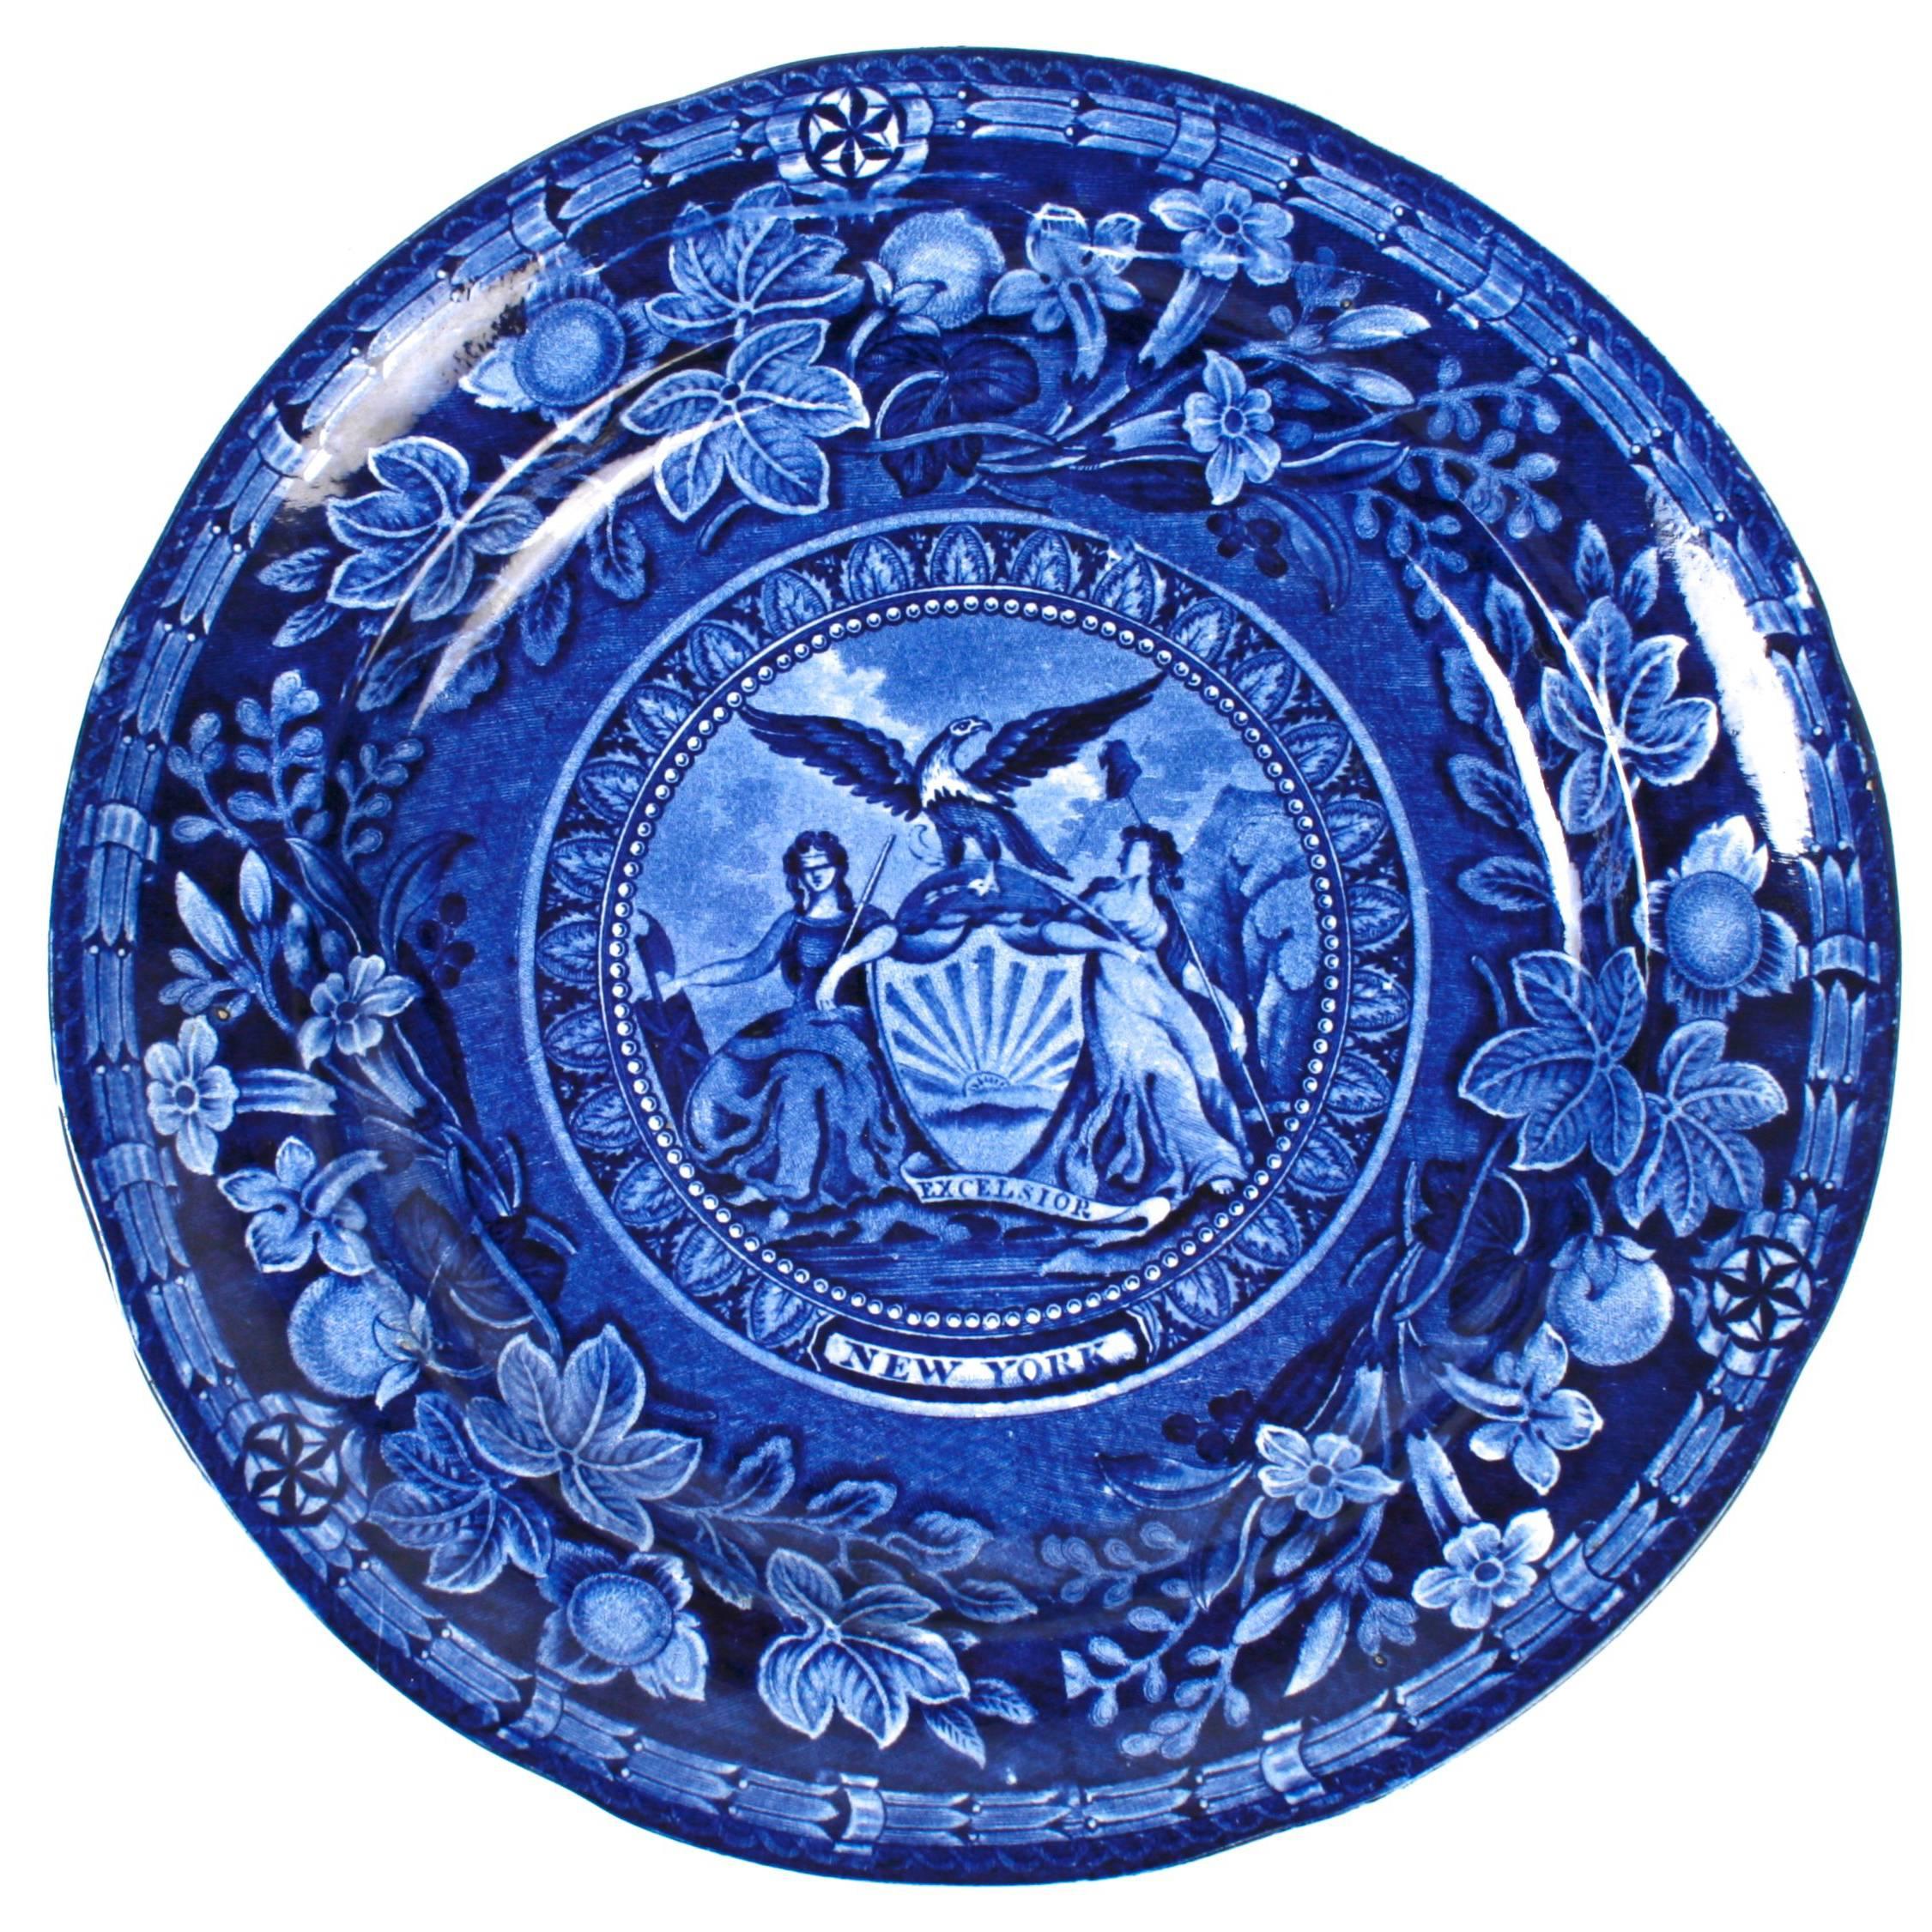 "New York Blue" Staffordshire Plate by Thomas Mayer